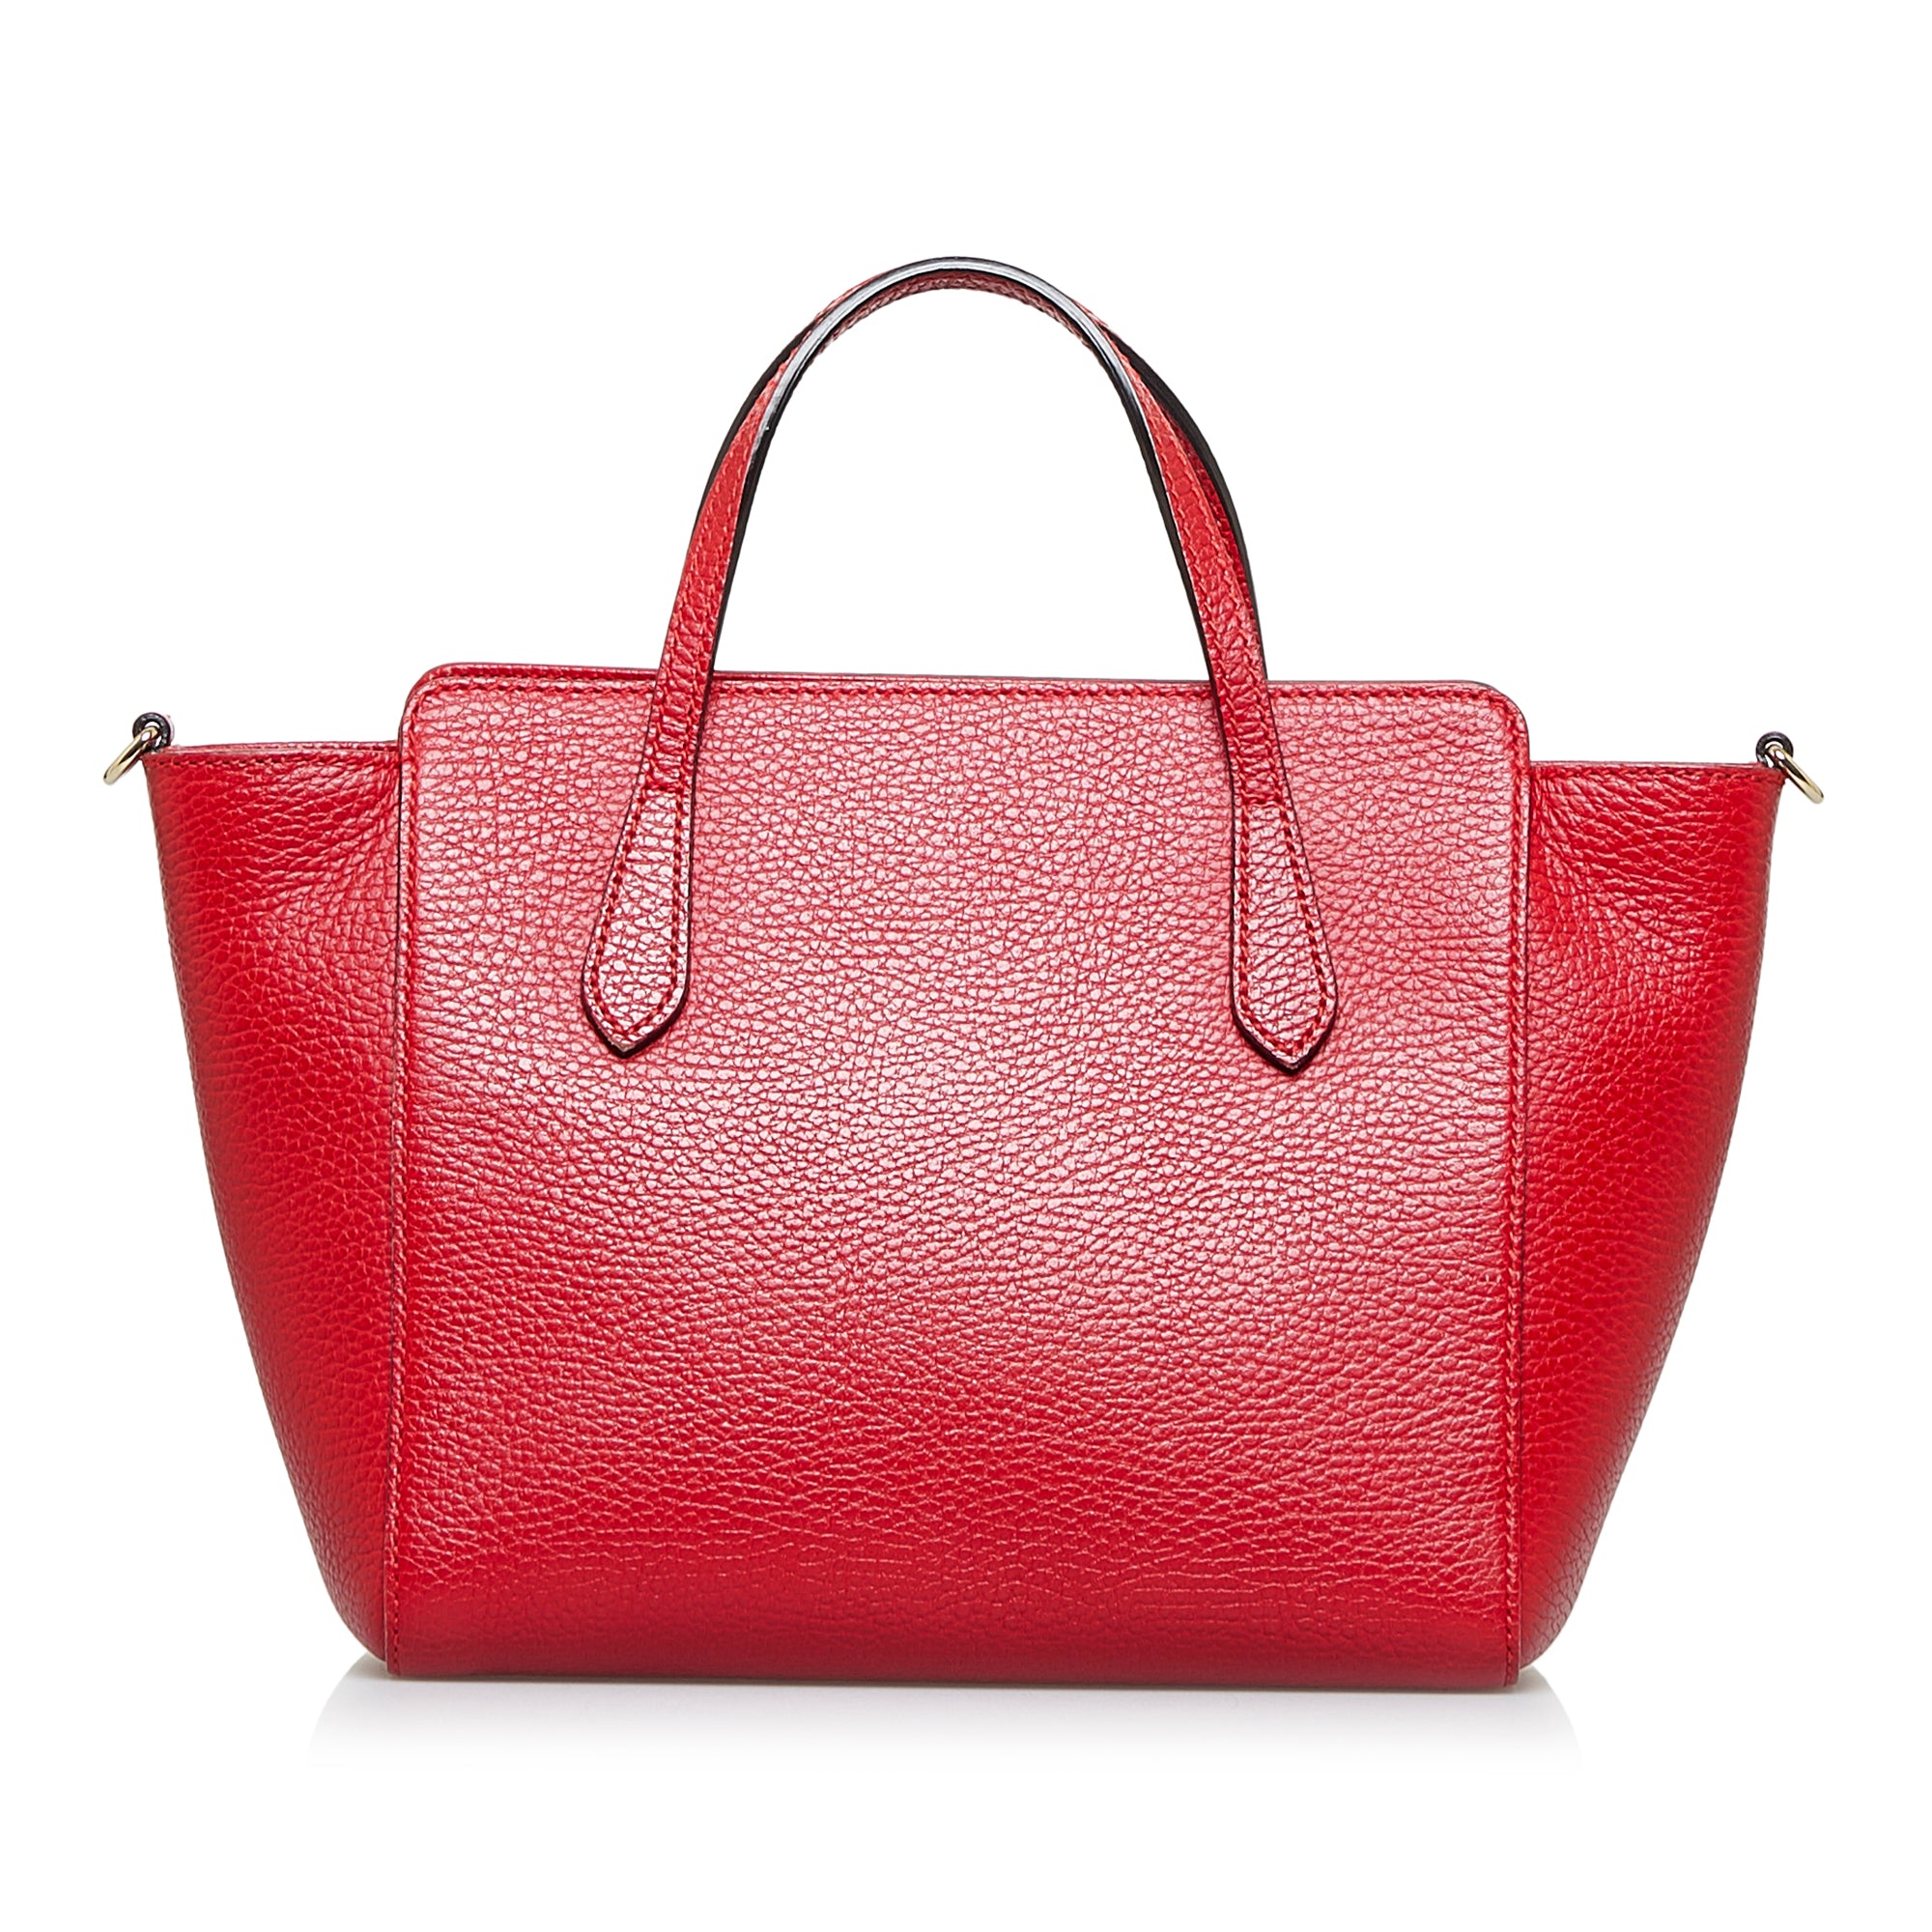 Gucci Swing Mini Leather Top Handle Bag in Red